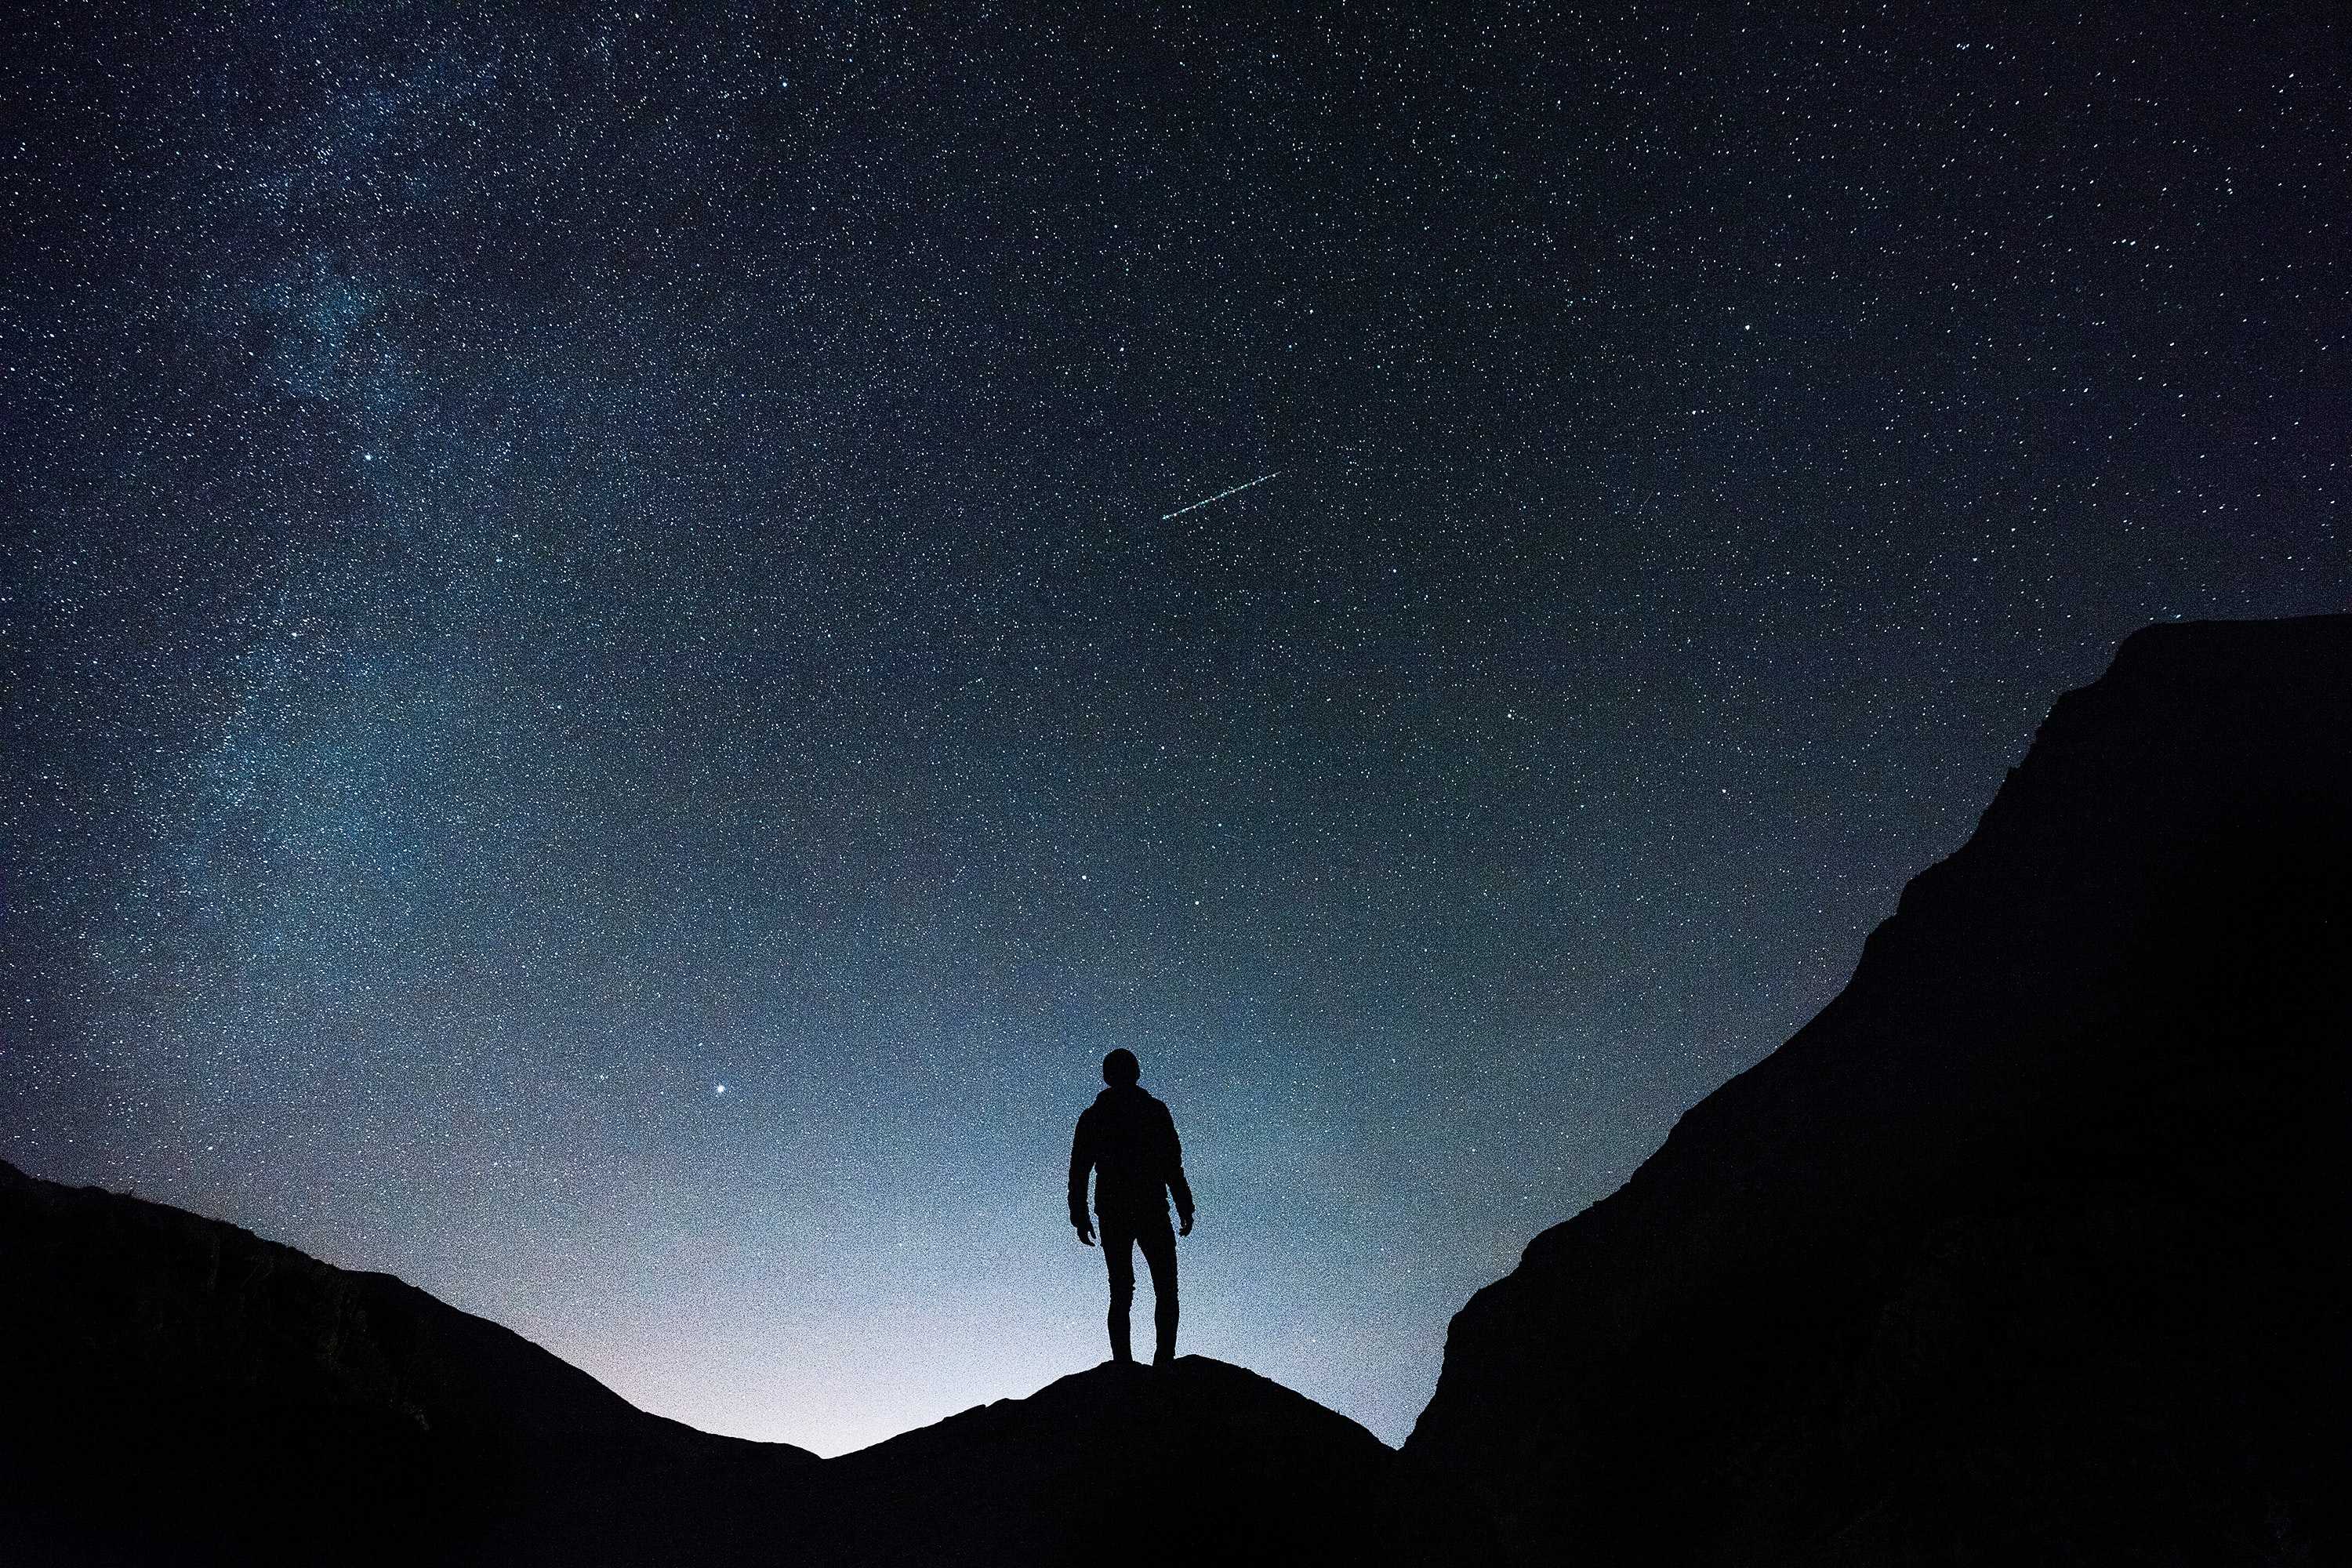 Silhouette of a man standing on a mountain looking at a starry night sky